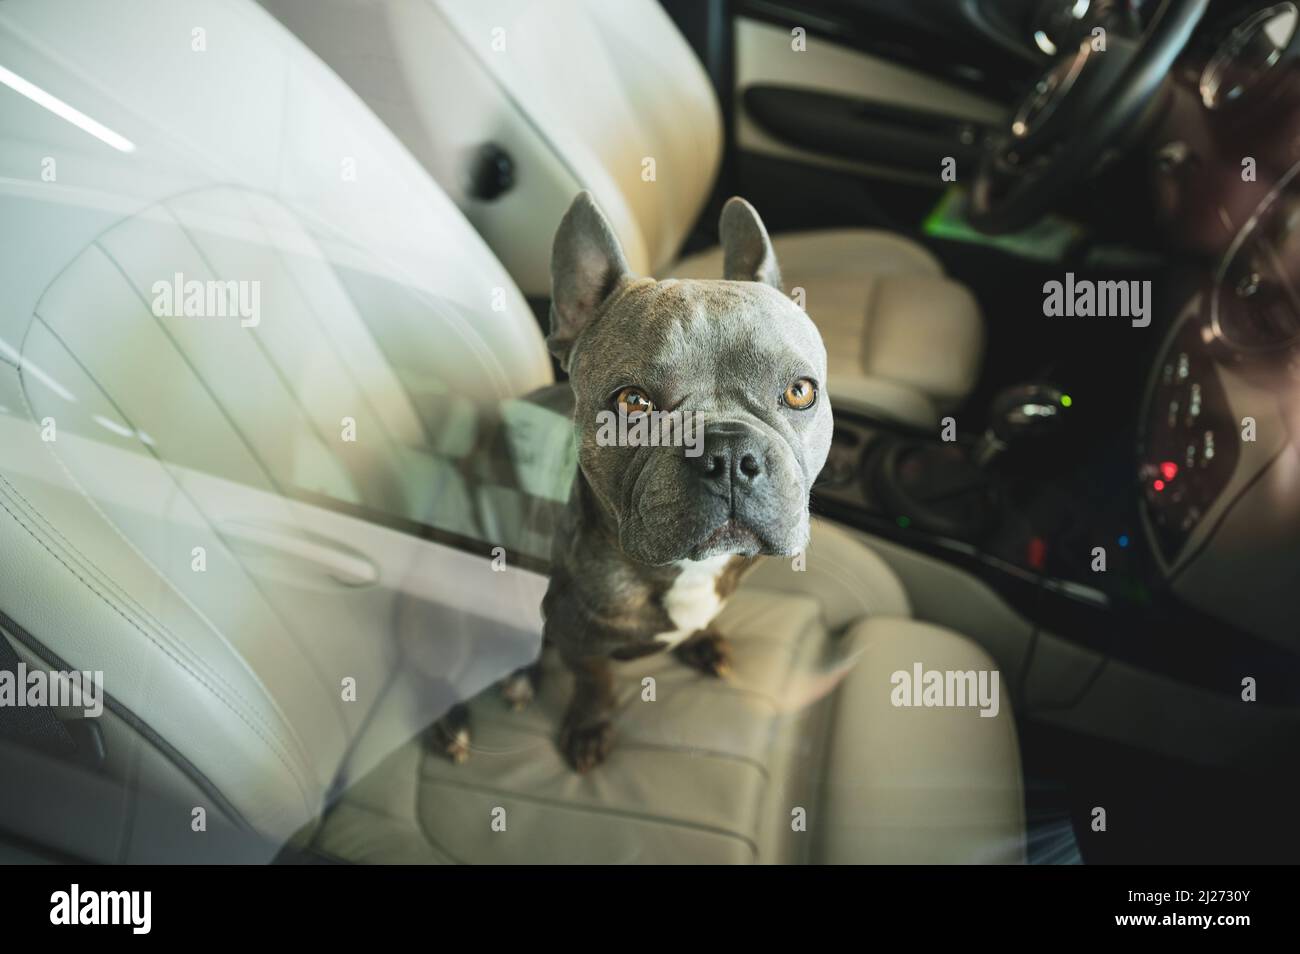 Sad looking dog left in hot car in parking lot - don't leave animals alone  in hot cars Stock Photo - Alamy